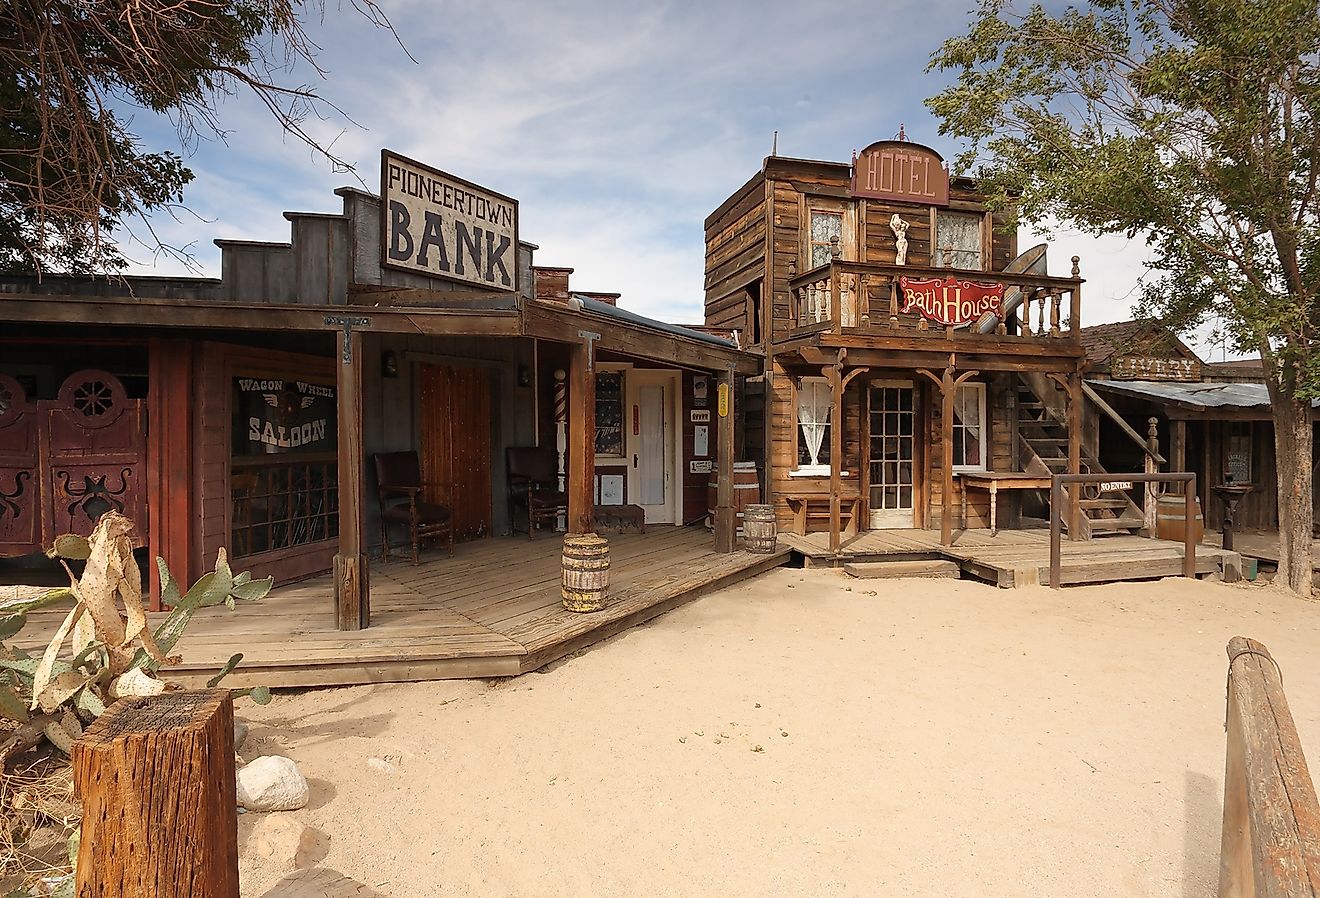 Pioneertown, California saloon and bath house. Mfield, Matthew Field, http://www.photography.mattfield.com, CC BY-SA 3.0 <http://creativecommons.org/licenses/by-sa/3.0/>, via Wikimedia Commons